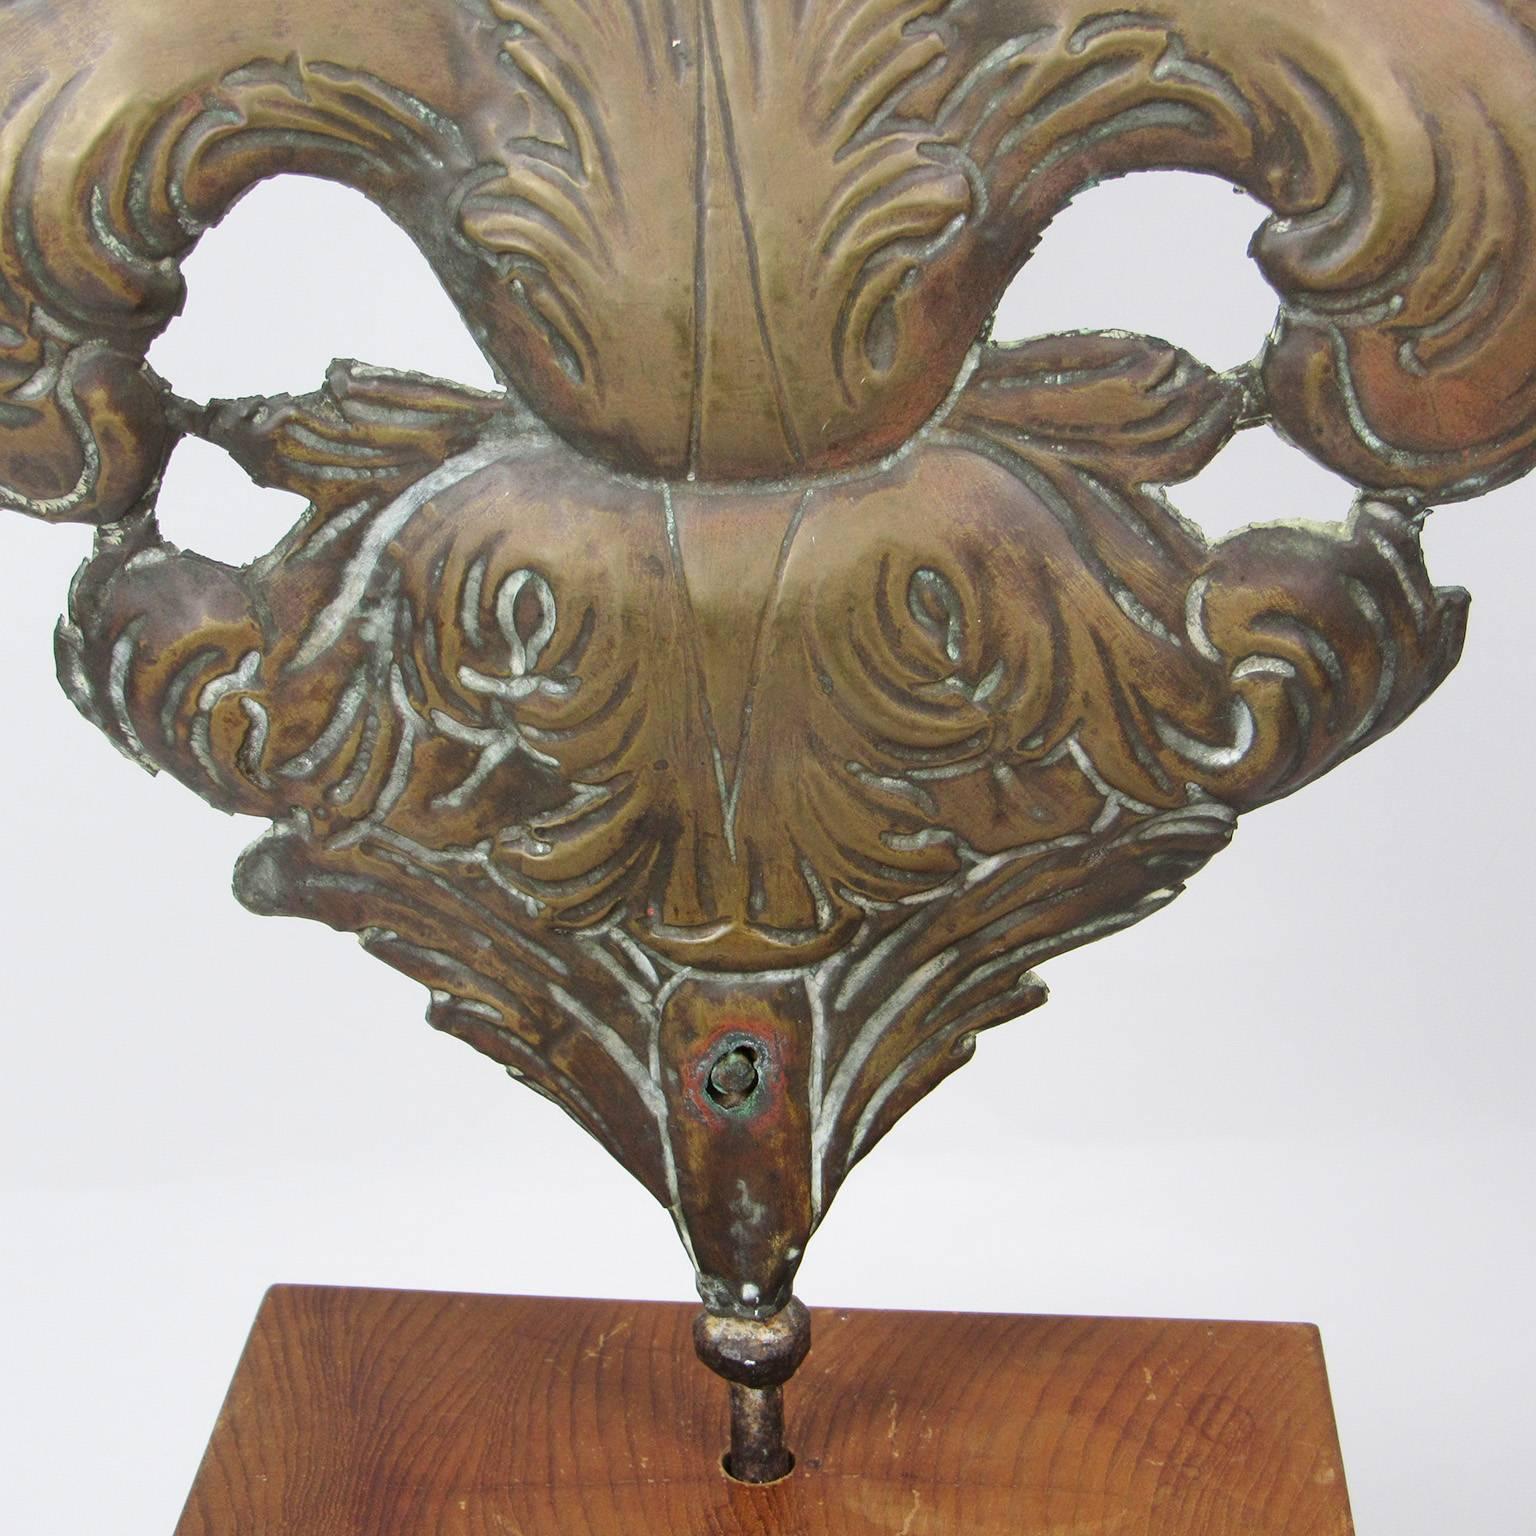 19th Century Molded and Pierced Copper Architectural Decoration In Good Condition For Sale In Concord, MA